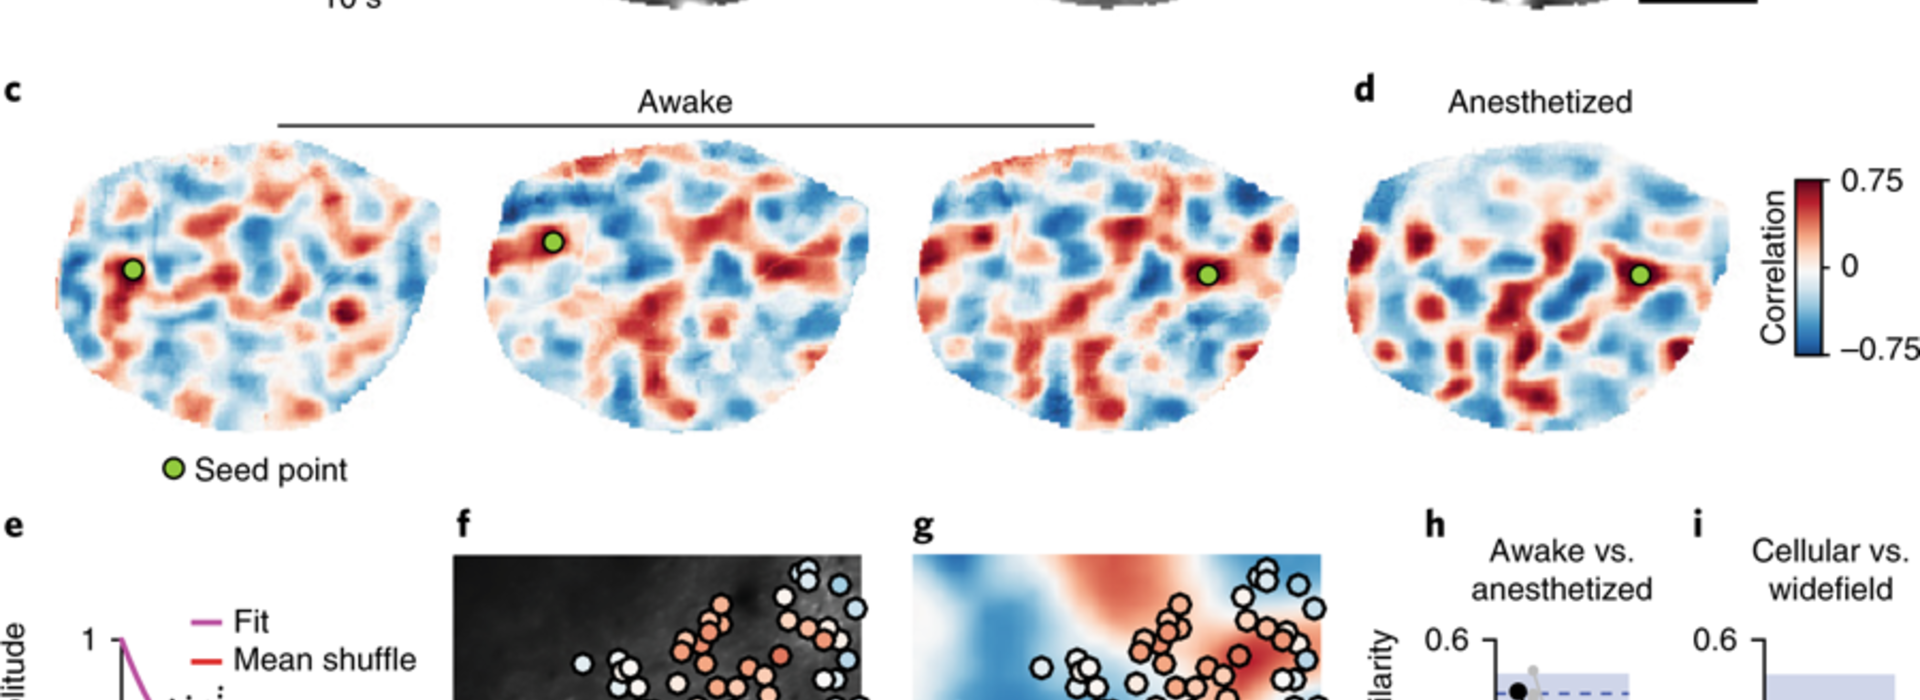 Correlated spontaneous activity in awake ferret visual cortex reveals large-scale modular distributed functional networks.